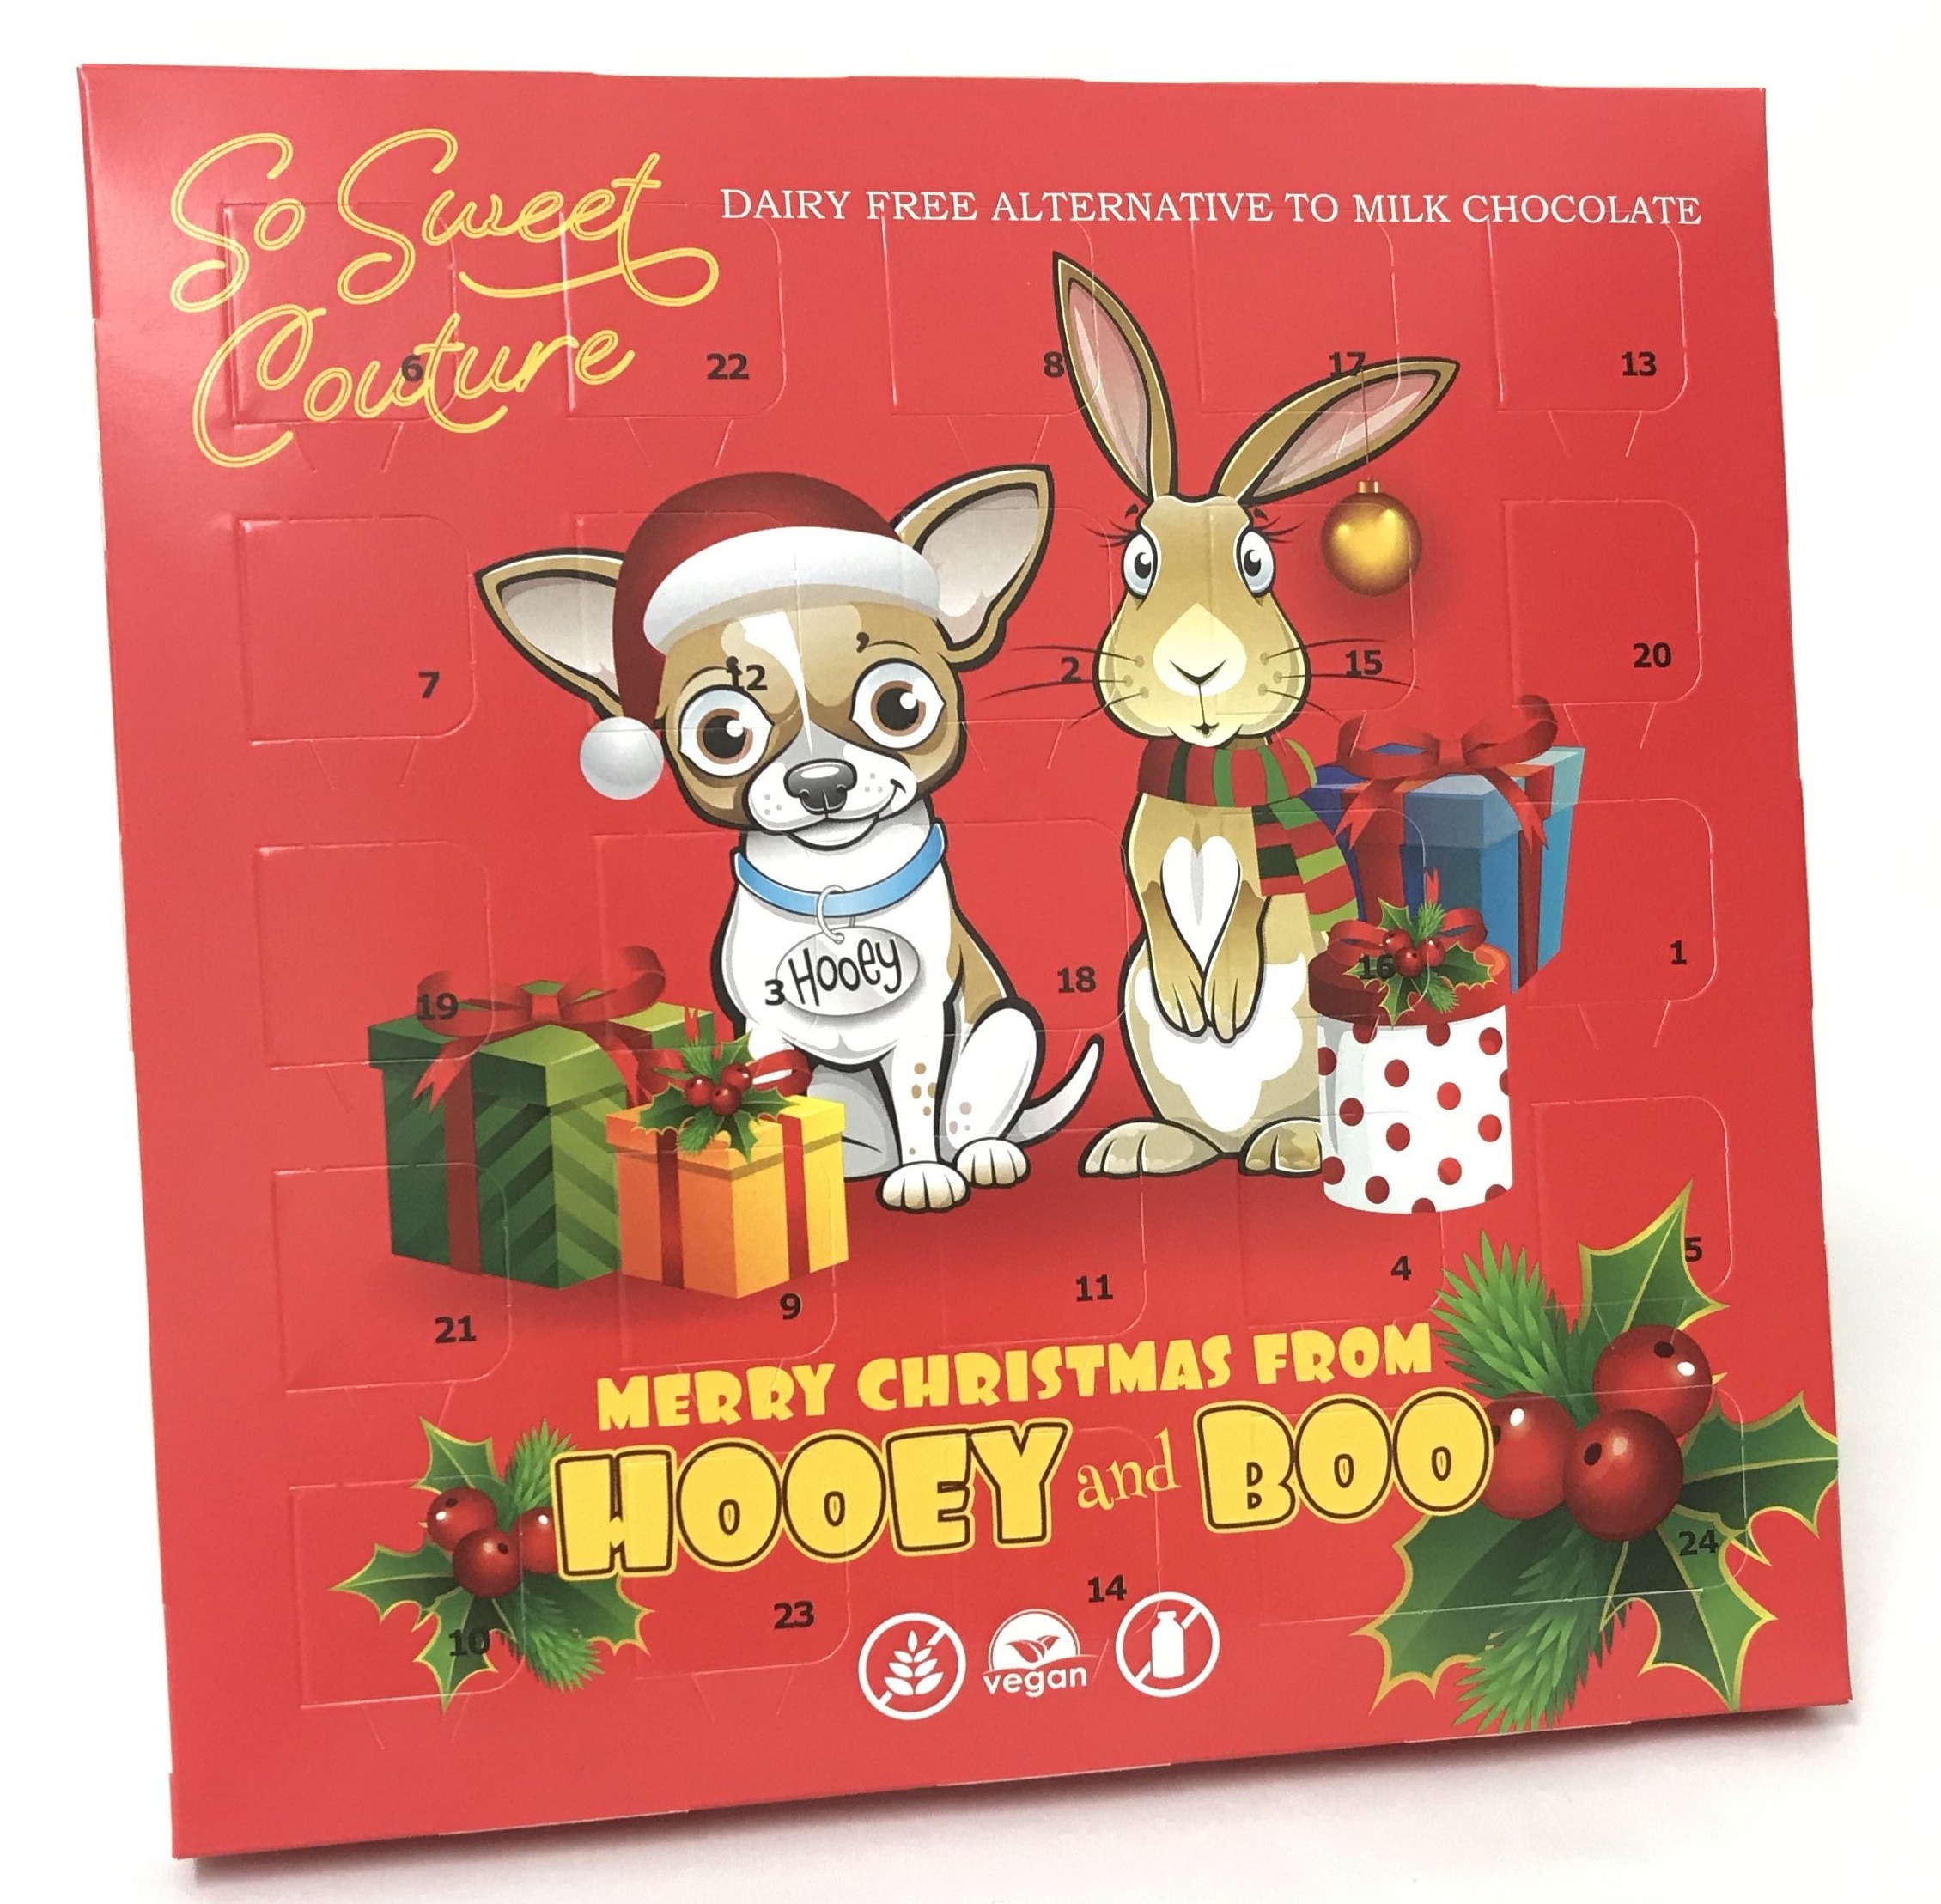 Dairy Free Hooey and Boo at Christmas  Advent Calendar